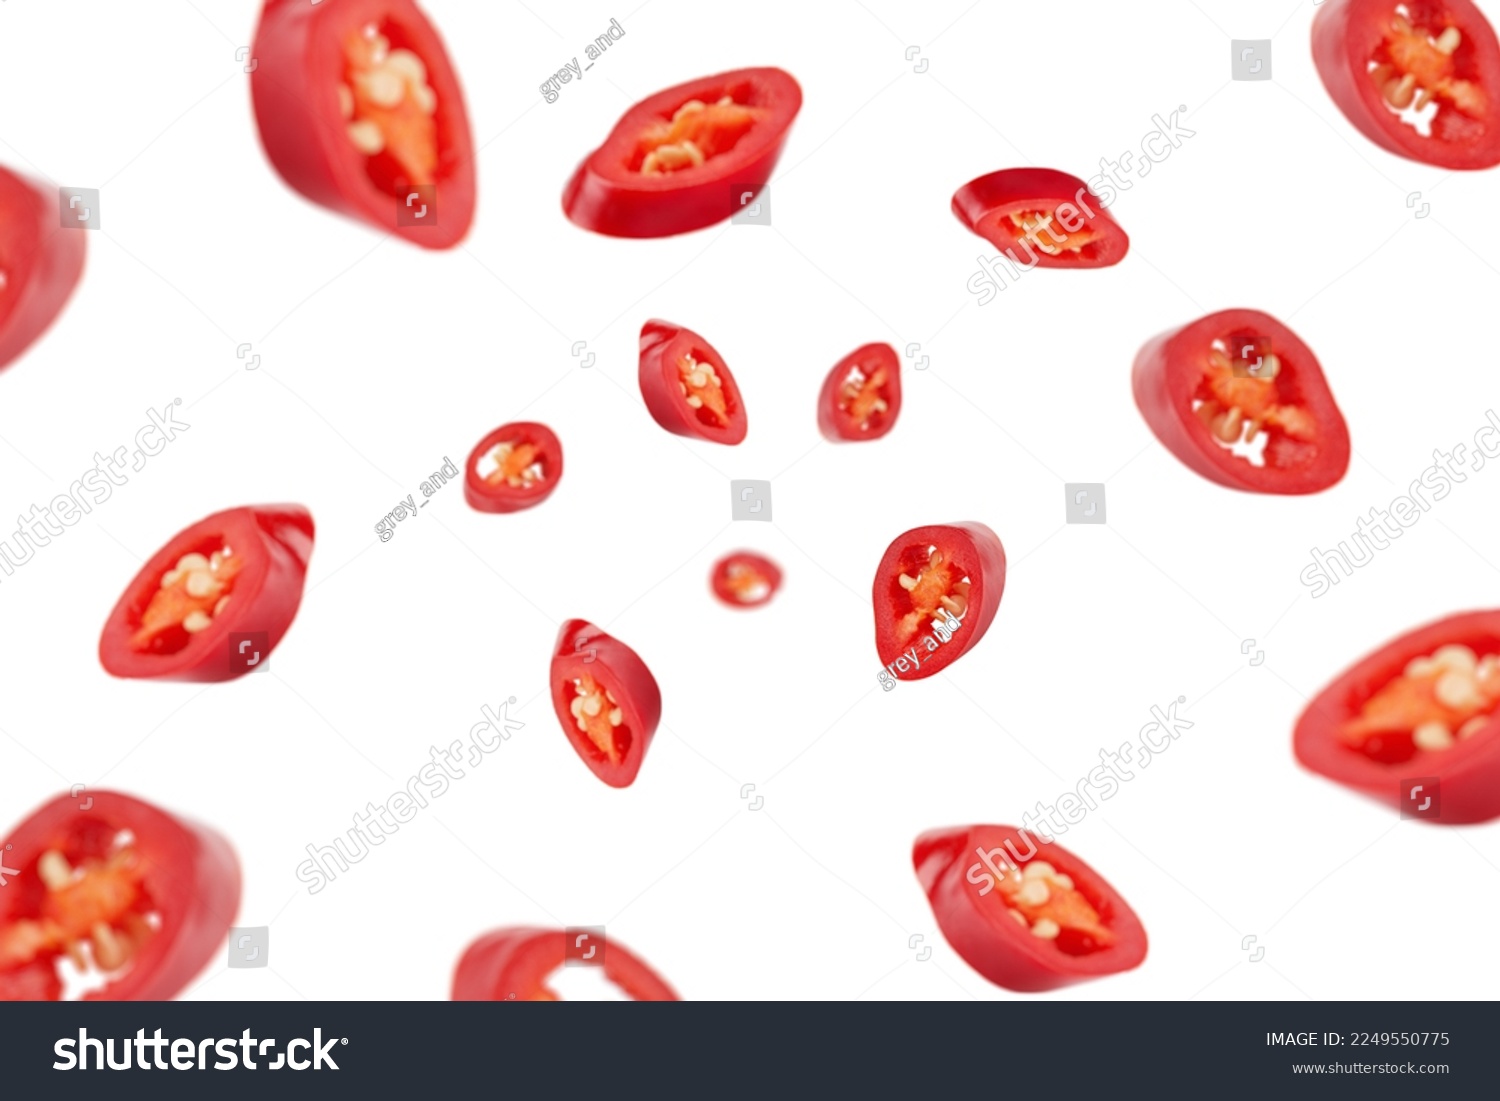 Falling sliced red hot chili peppers isolated on white background, selective focus #2249550775